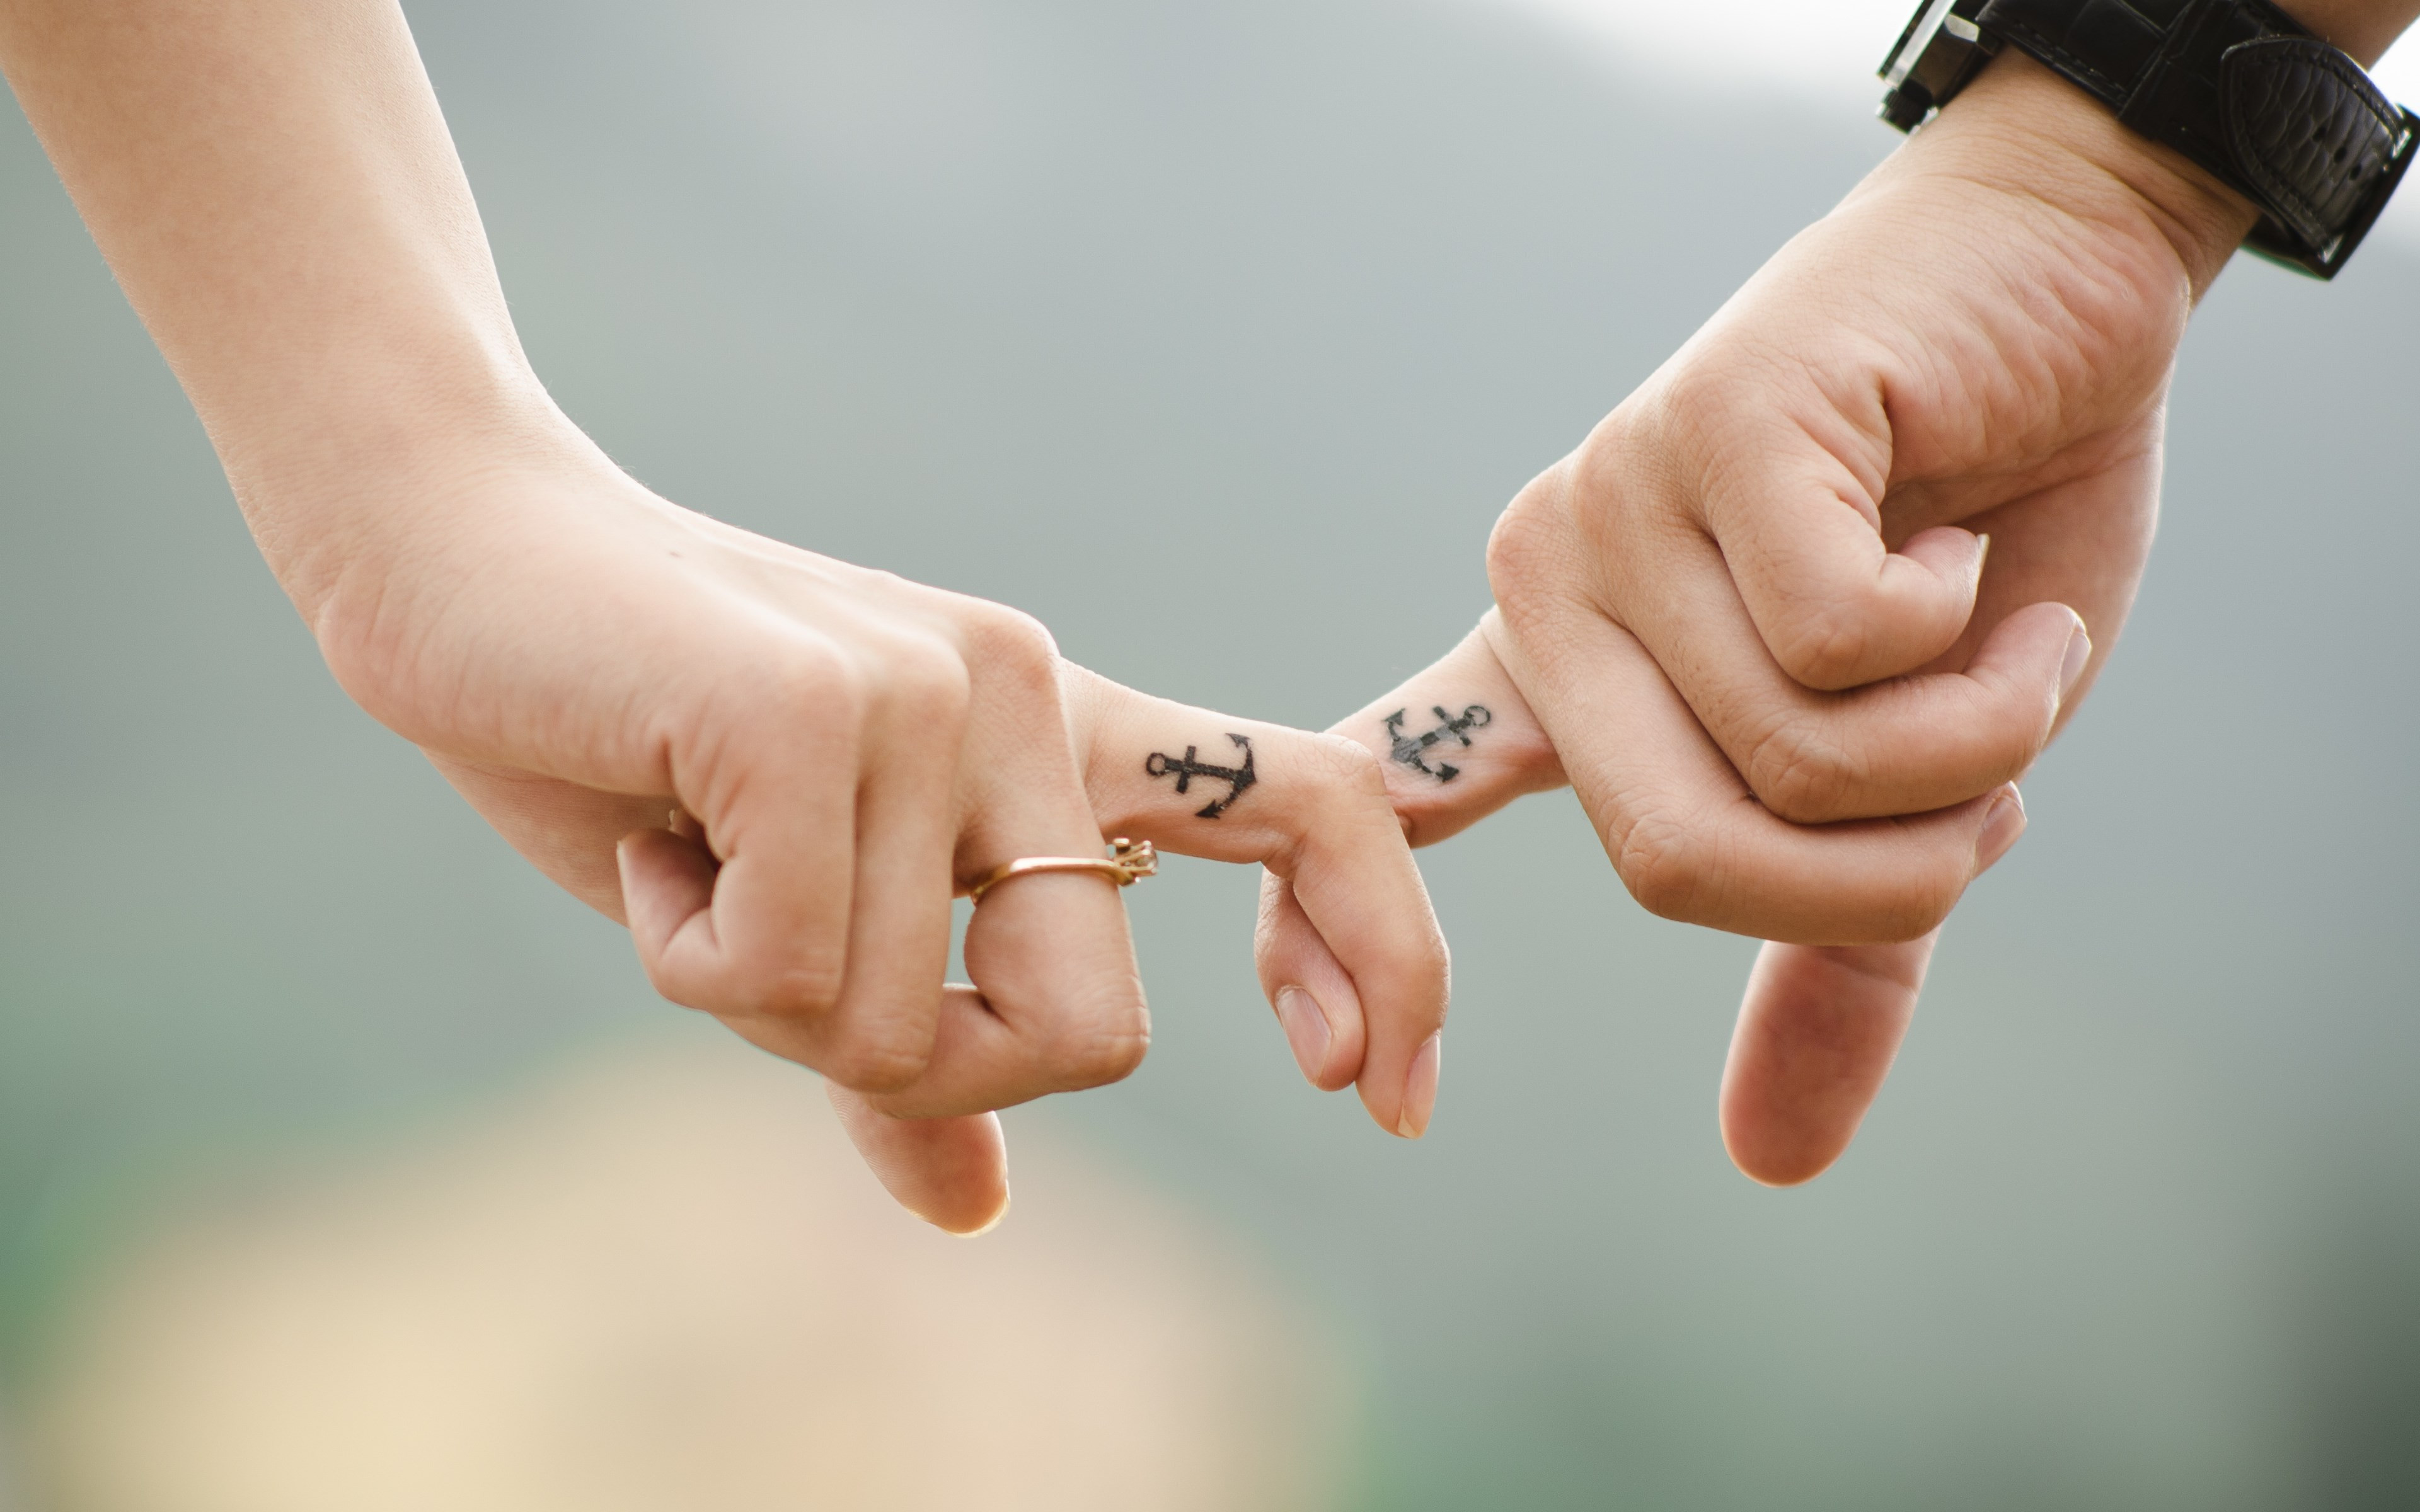 Download wallpaper: Hands, love, couple, ring 3840x2400